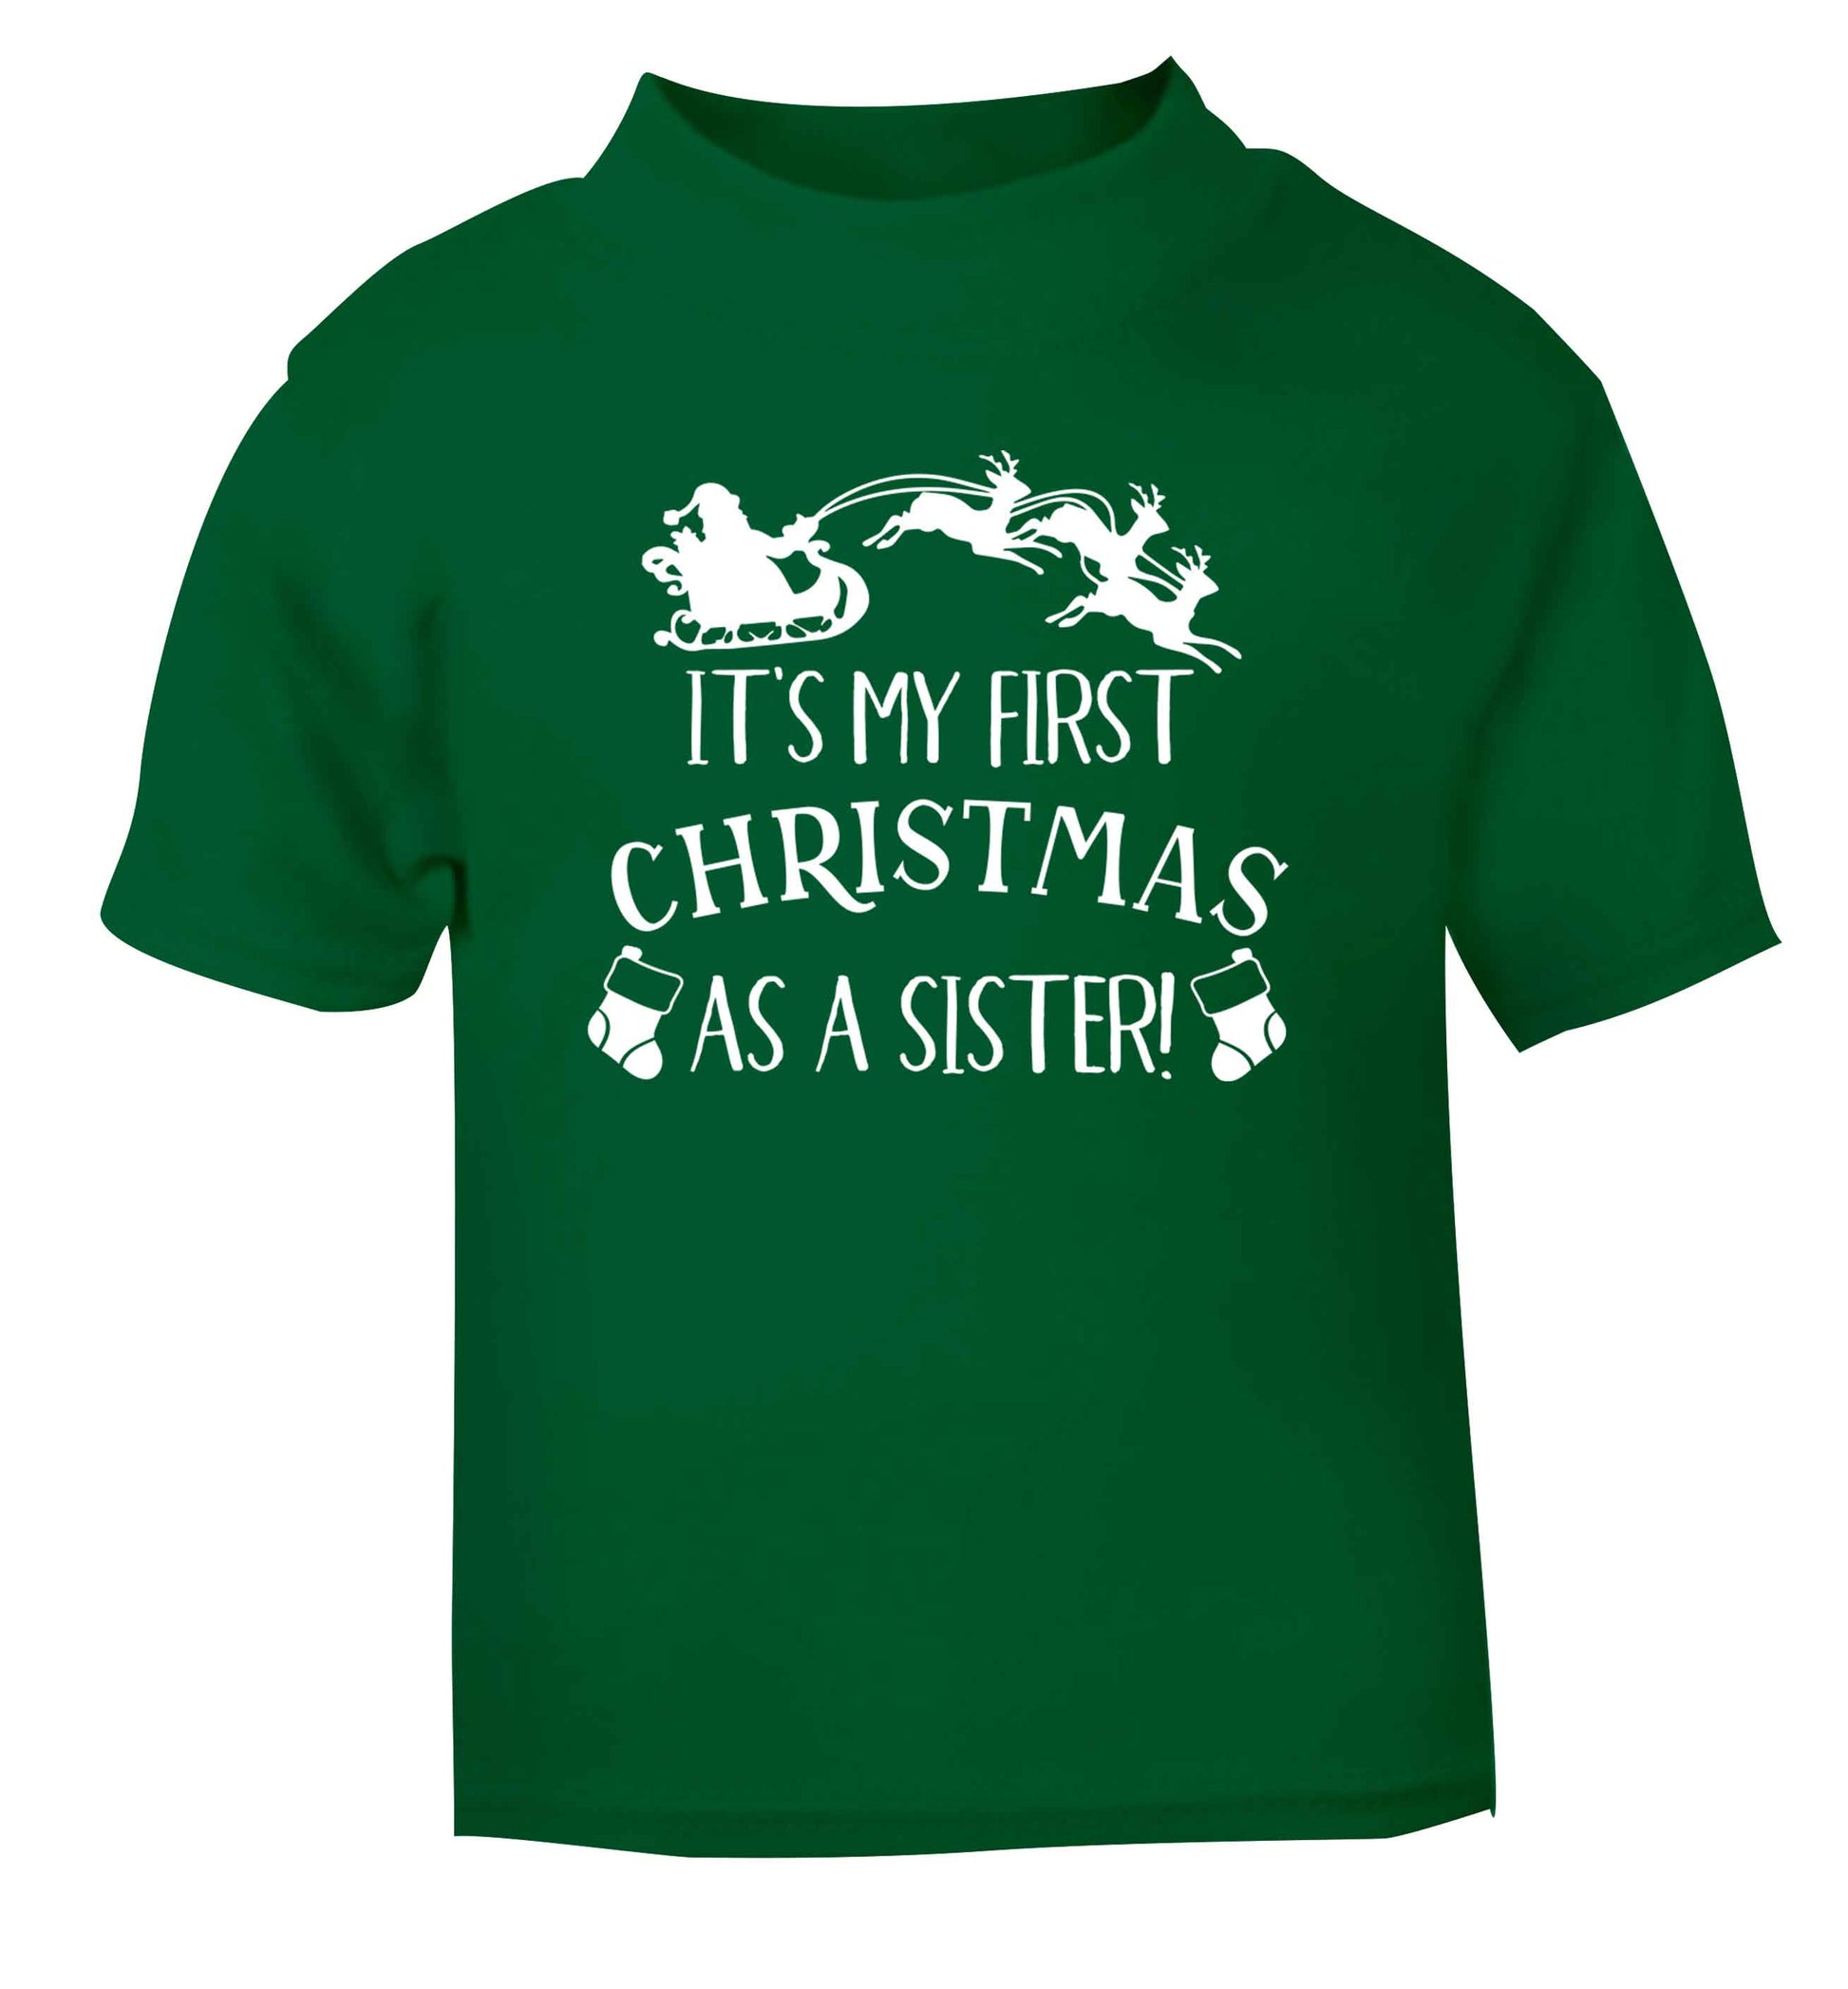 It's my first Christmas as a sister! green Baby Toddler Tshirt 2 Years